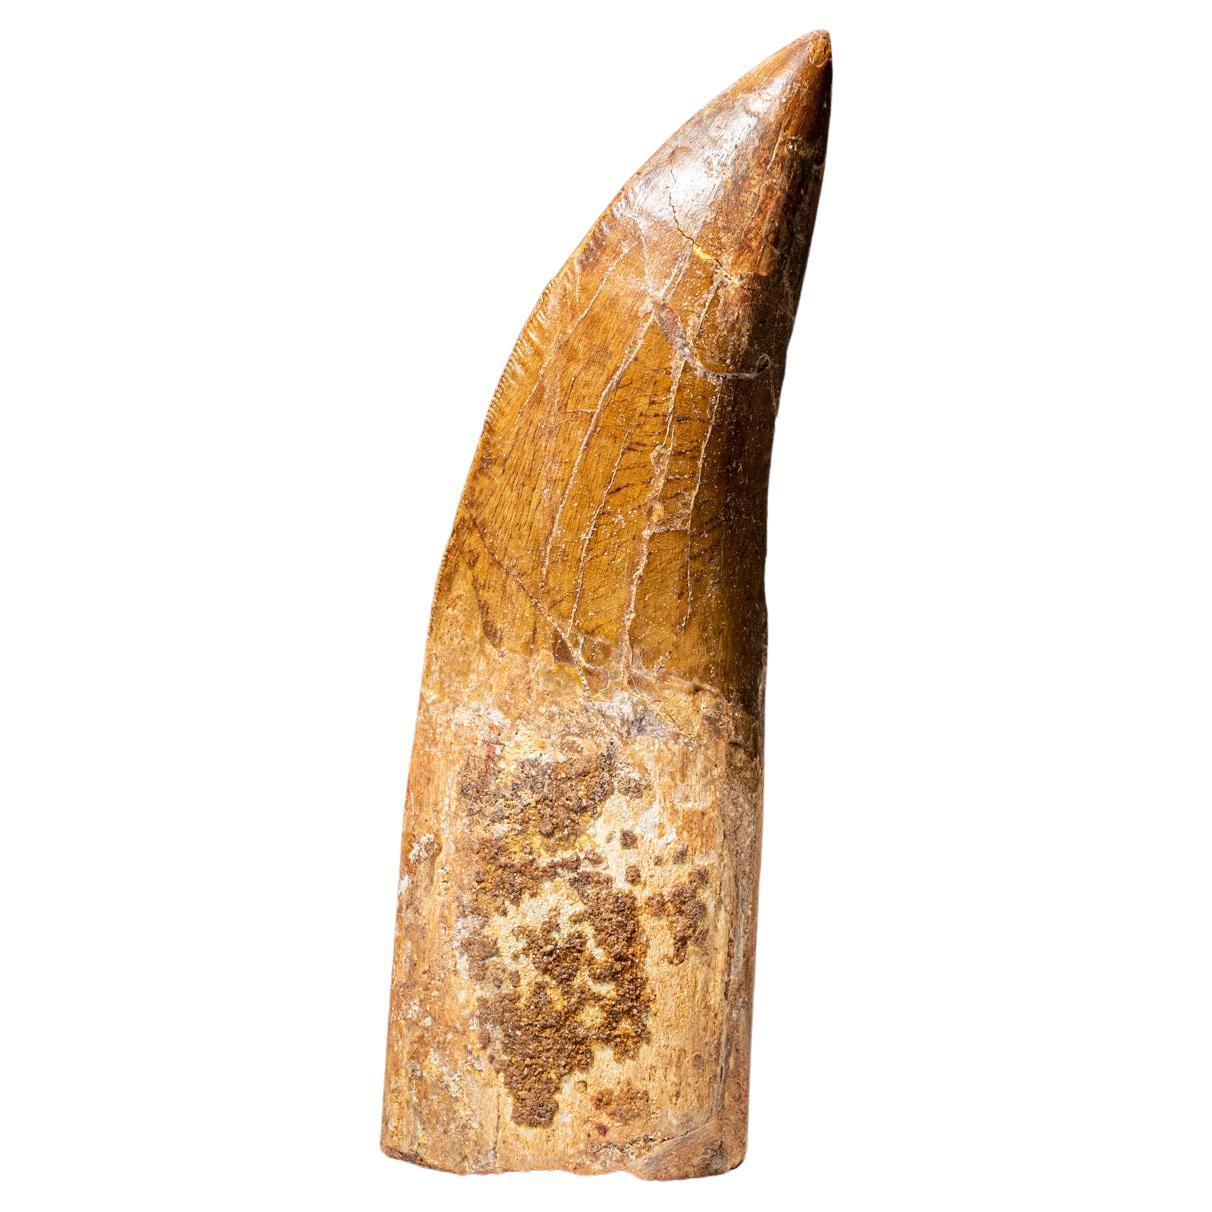 Natural & Genuine Large Carcharodontosaurus Tooth from Morocco (109 grams)